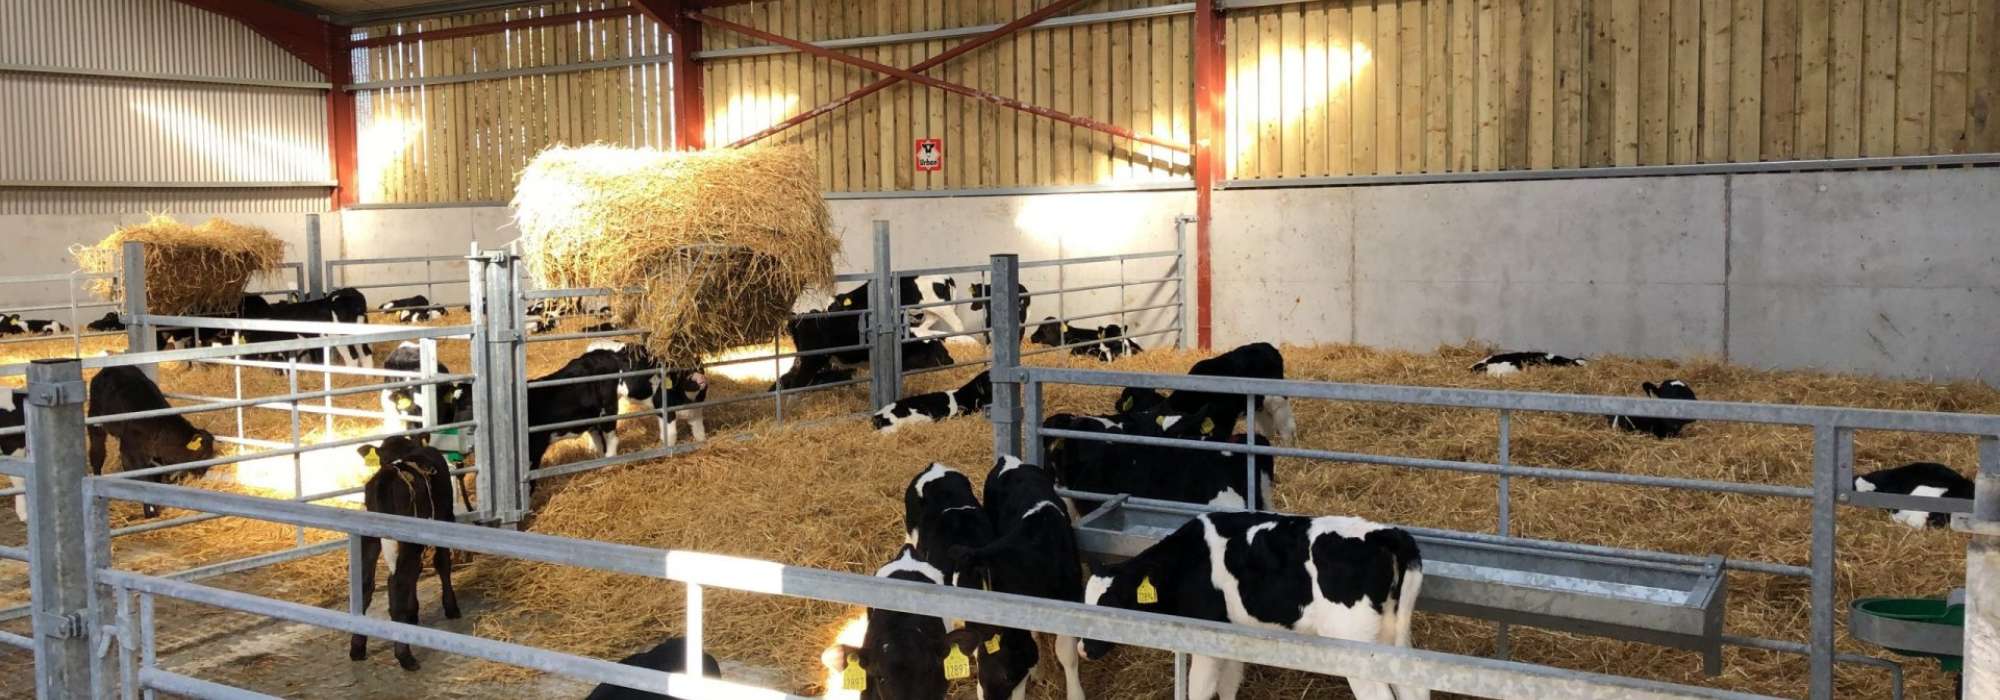 Calves in calf housing units with plastic calf shelters and metal gates, on a farm yard